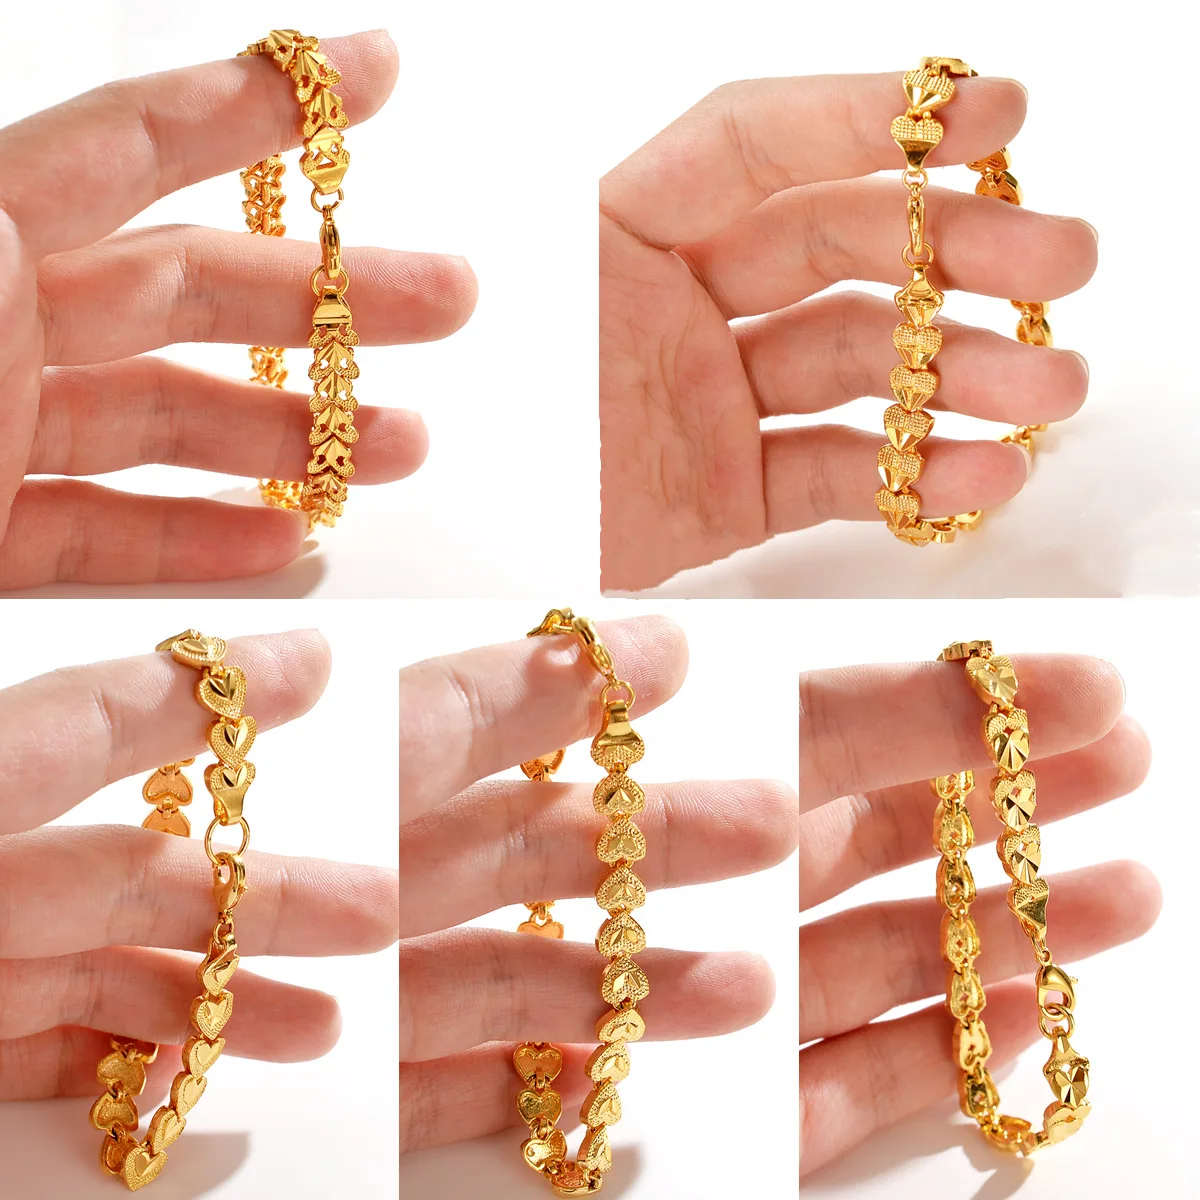 999 Real Gold Southeast Asia 24k Yellow Gold Color Watch Chain Women's Sand Gold Heart Bracelet Wedding Fine Jewelry Gift